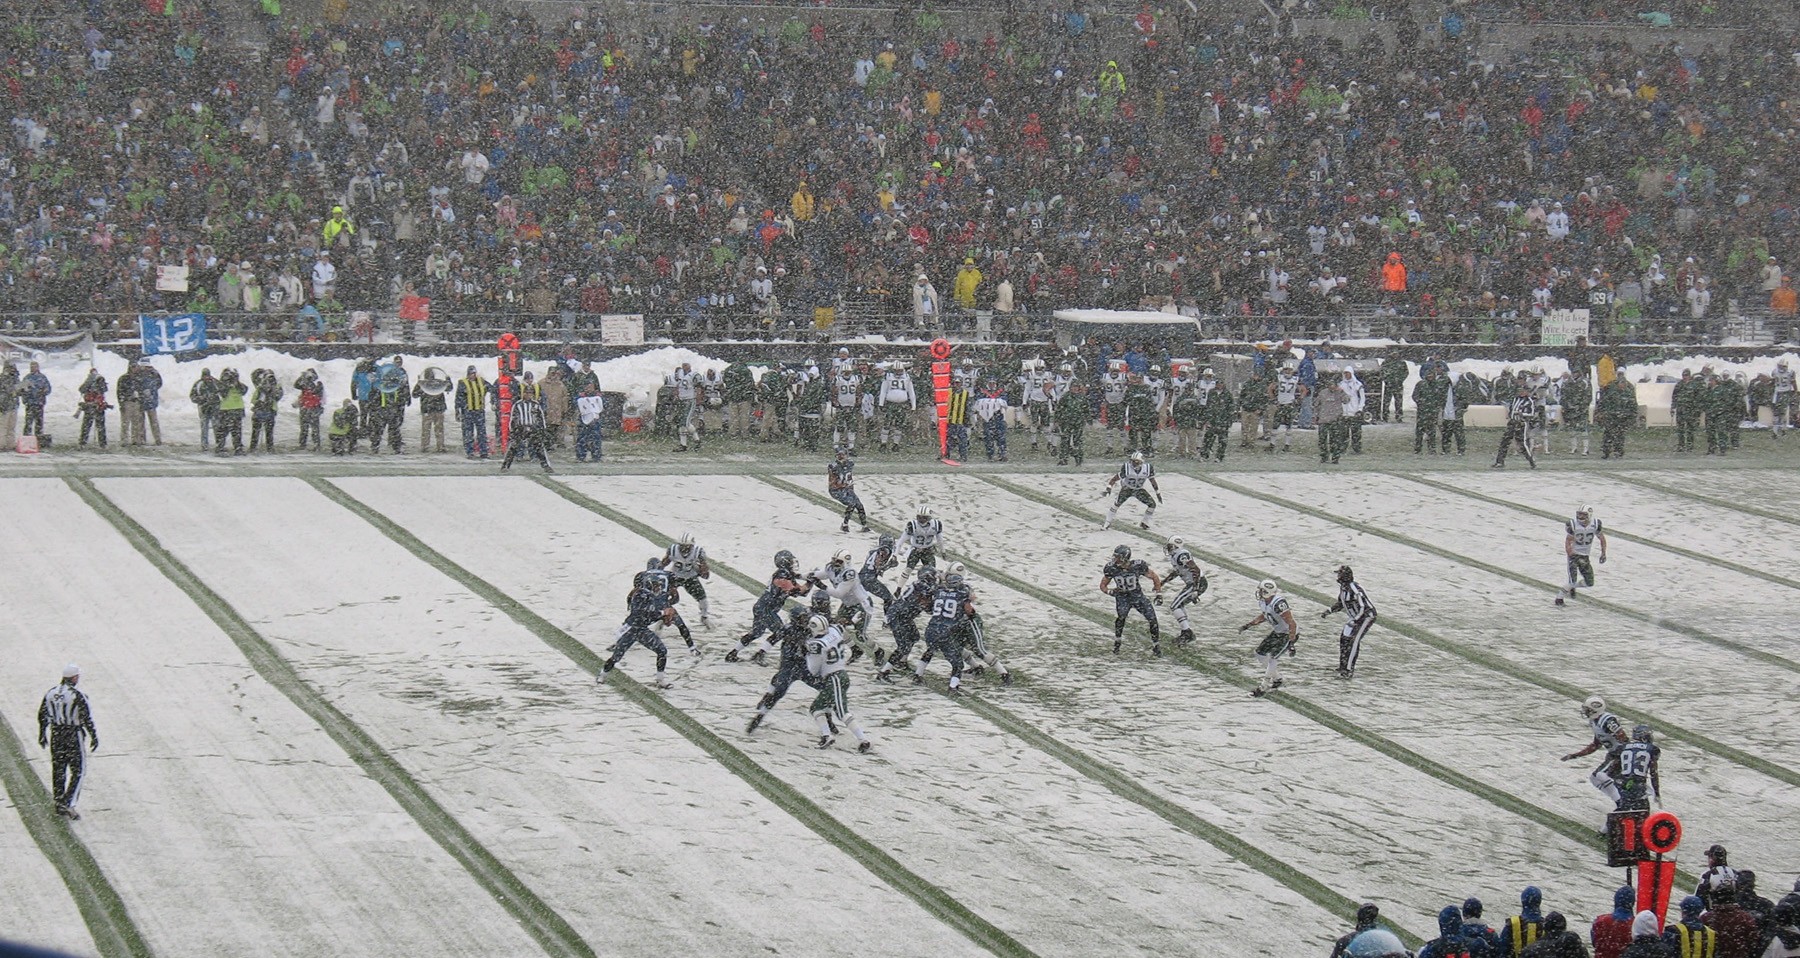 The Coldest, Snowiest NFL Games on Record - THE DIG